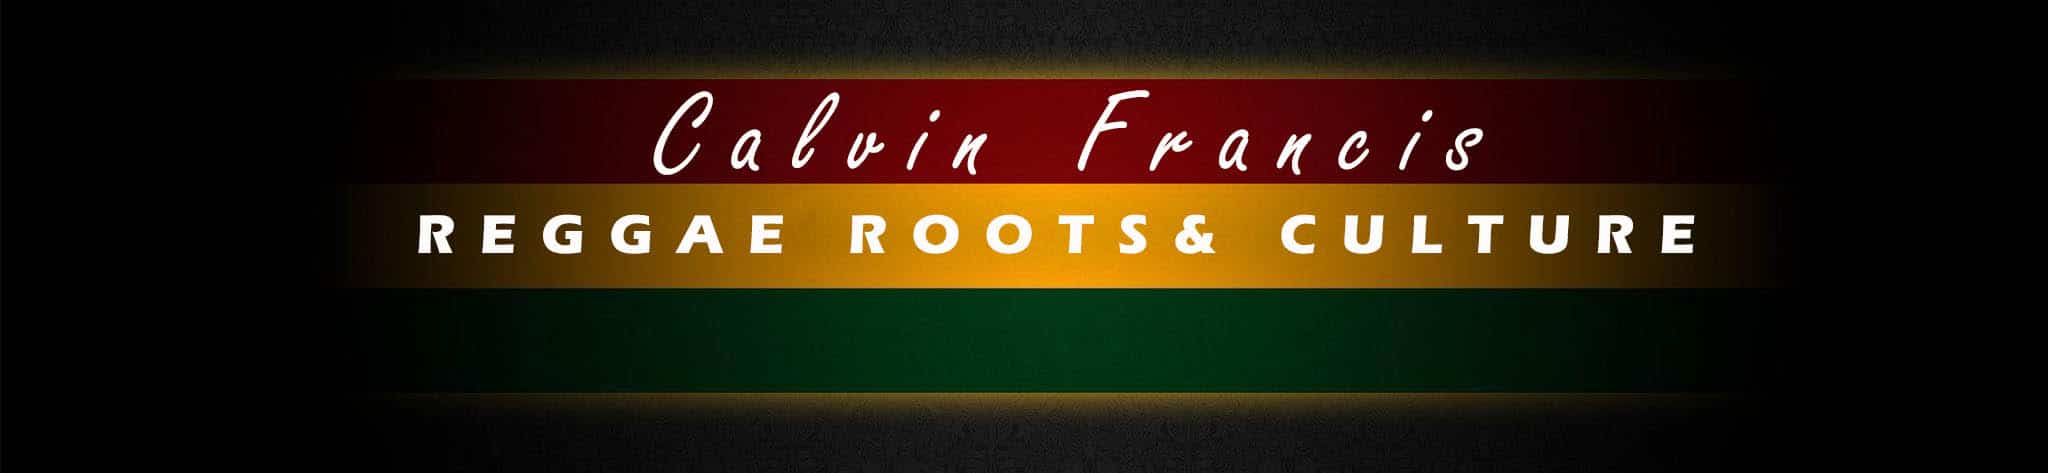 Reggae Roots & Culture with Calvin Francis